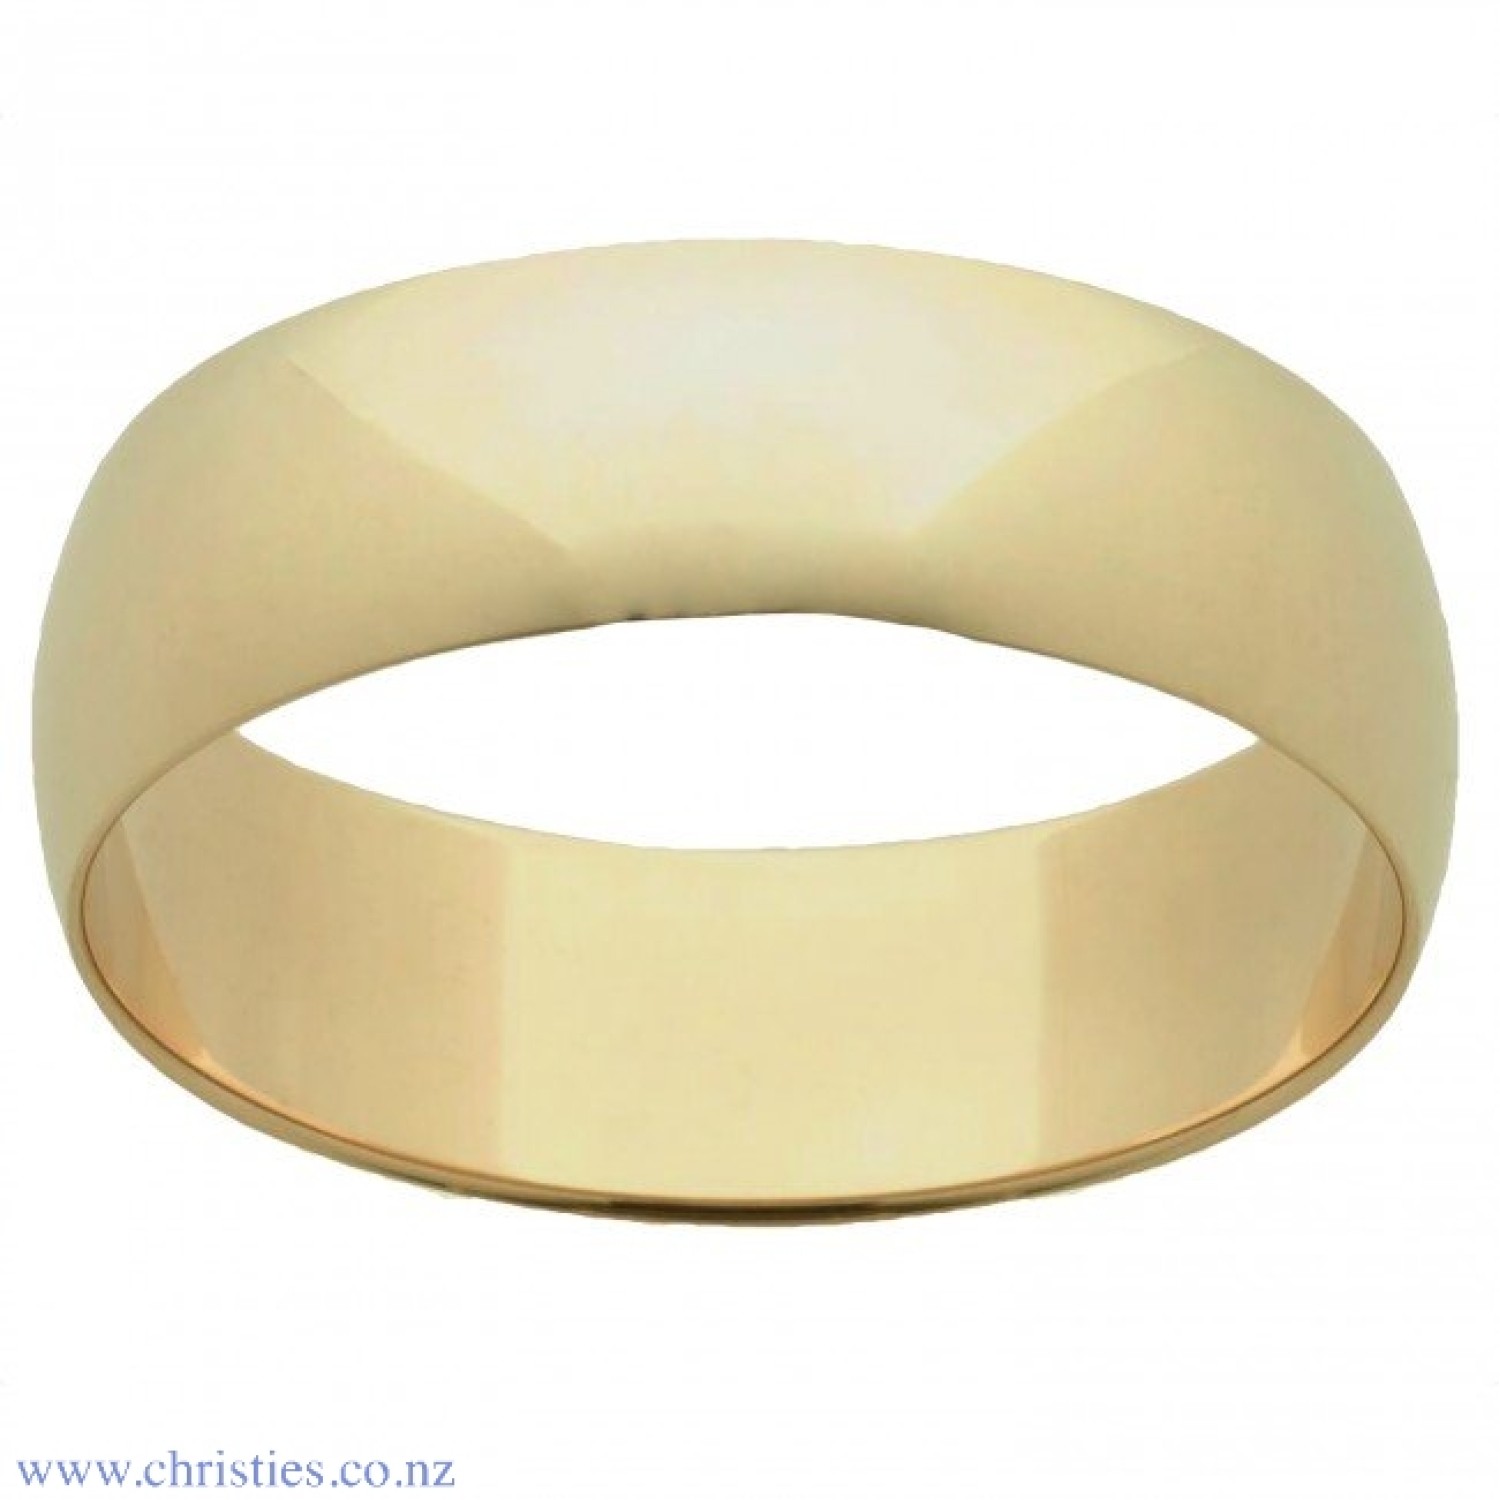 9ct Yellow Gold Wedding Ring 6mm. A 9ct Yellow Gold Wedding Ring 6mm in width LAYBUY - Pay it easy, in 6 weekly payments and have it now. Only pay the price of your purchase, when you pay your instalments on time. A late fee may be applied for mi @christi